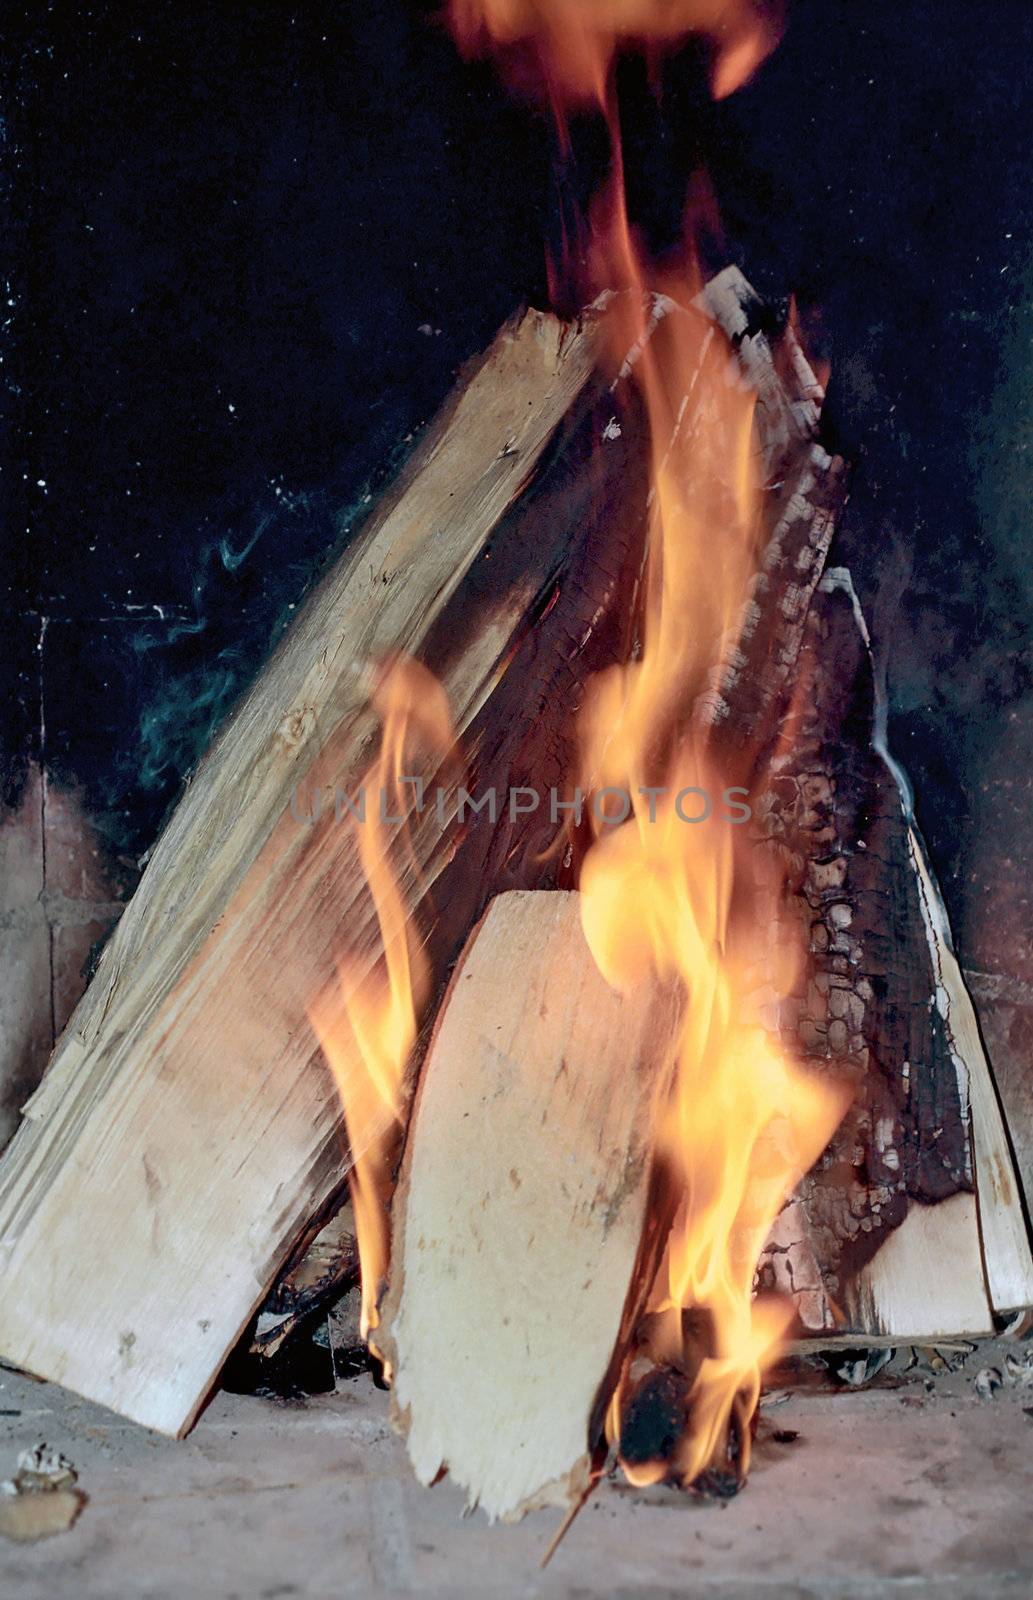 Flame and wirewood in fireplace